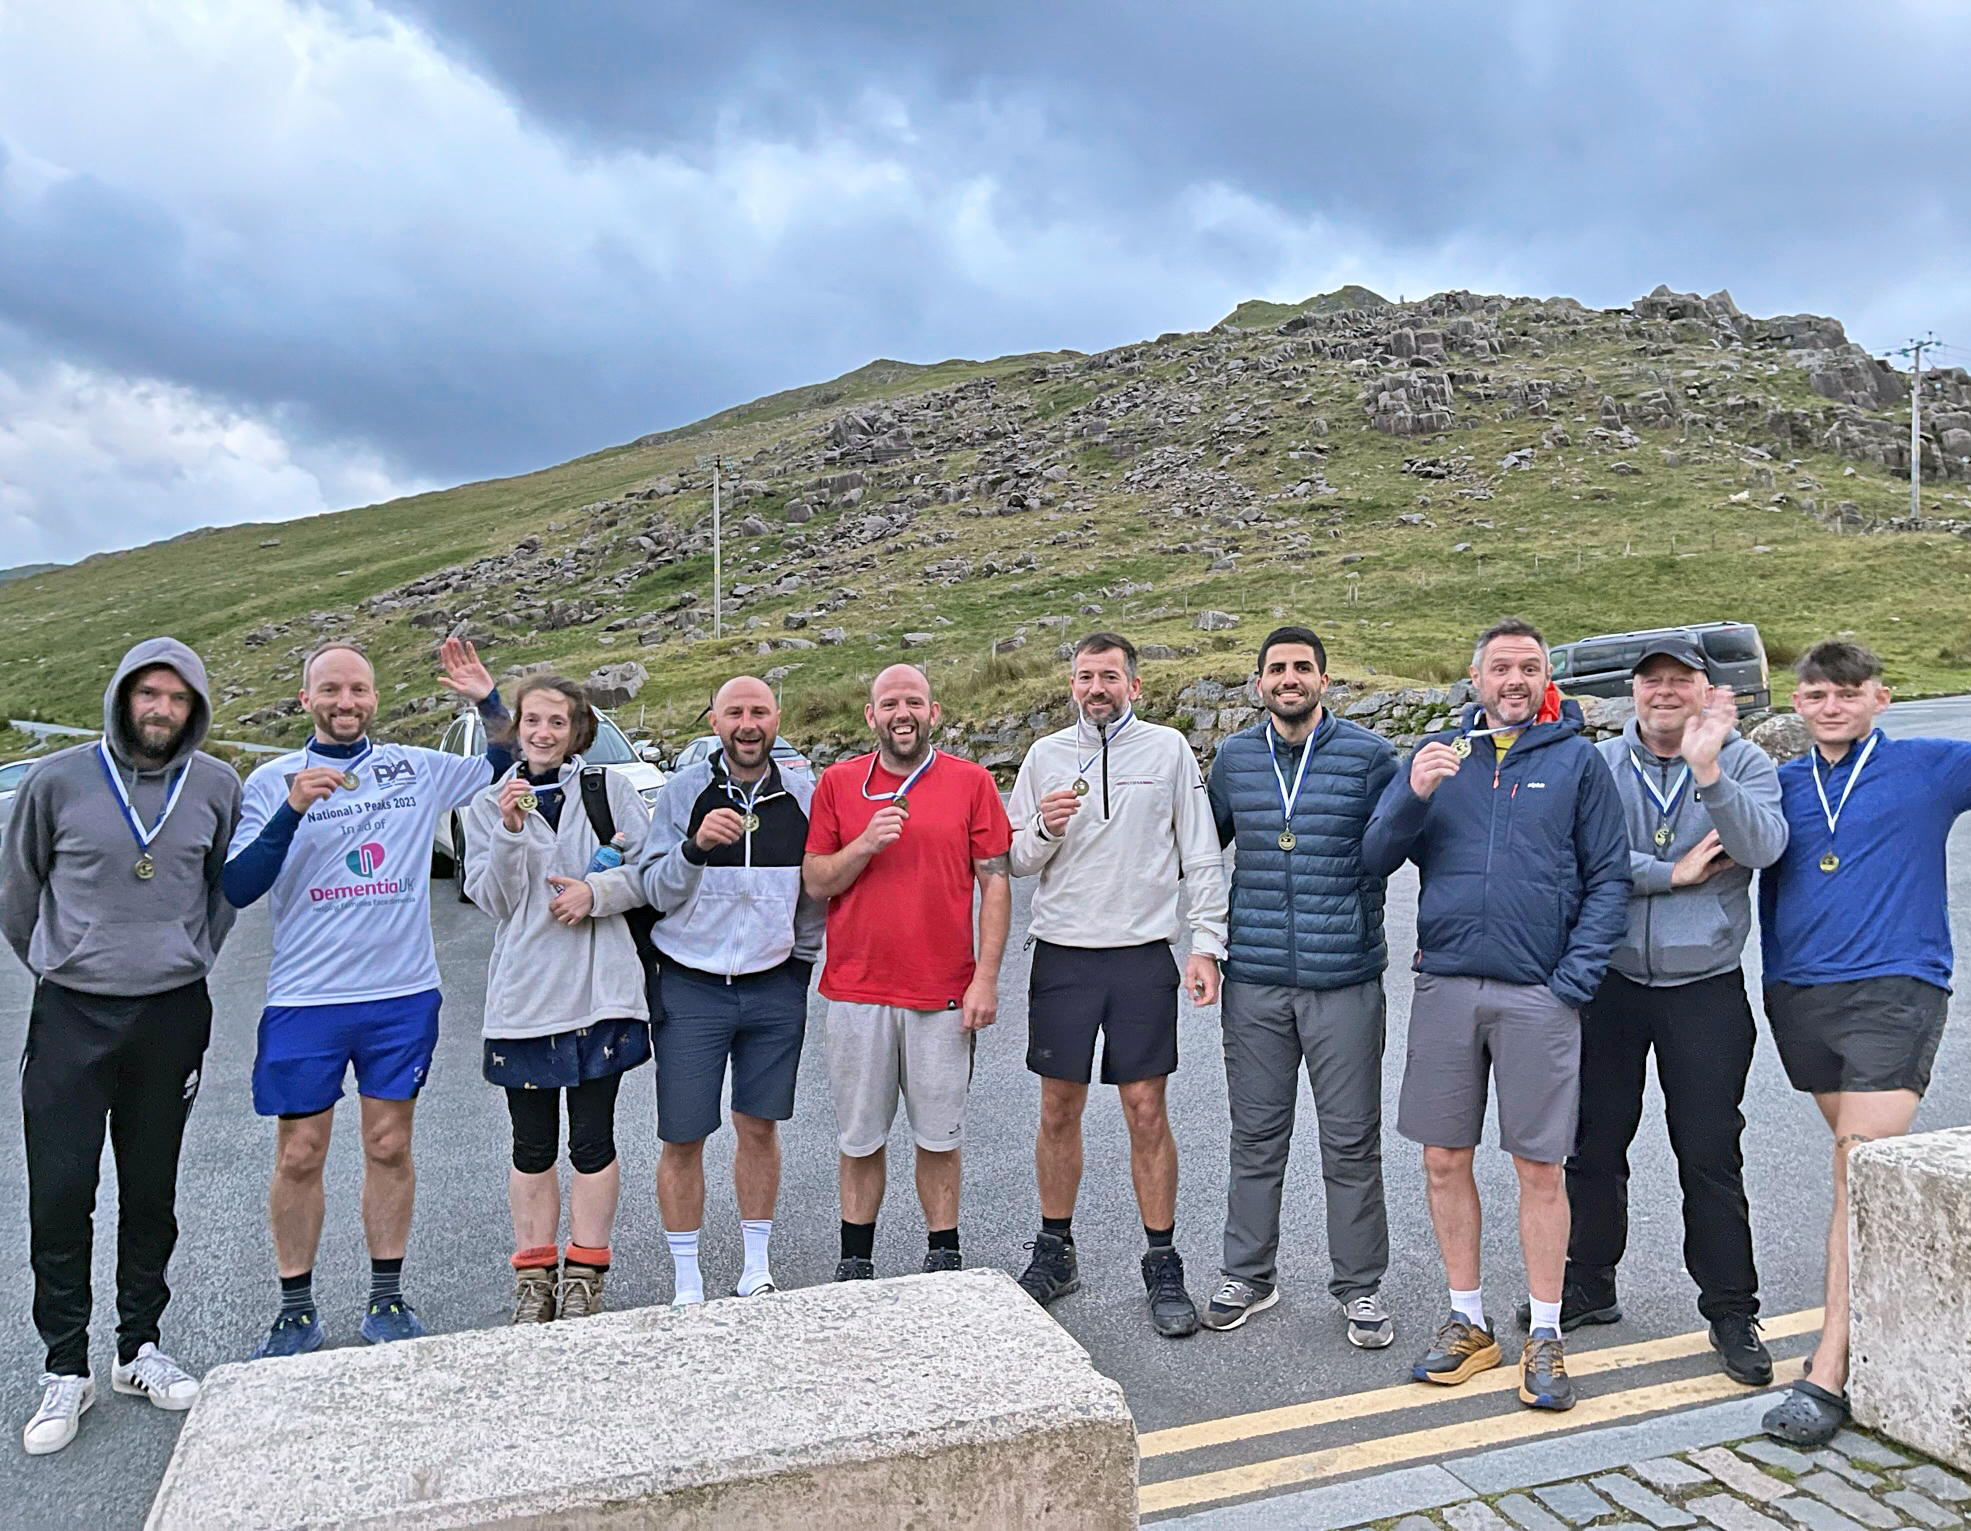 They did it - Three Peaks completed for Dementia UK.